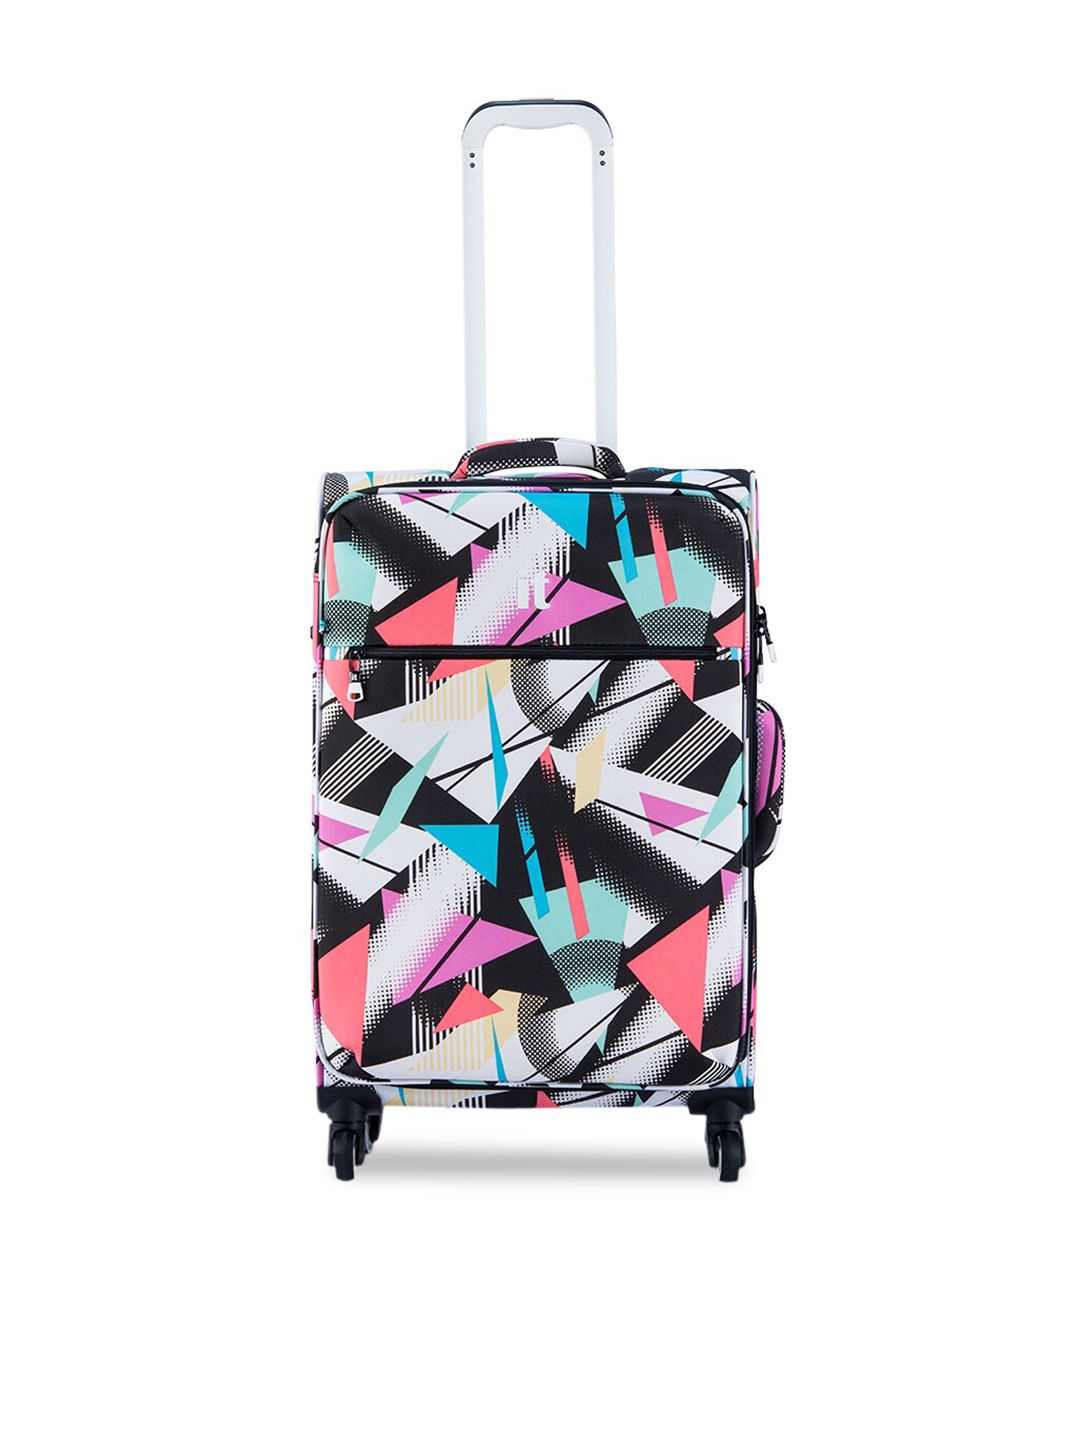 IT luggage Multi-Printed Soft-Sided Medium Trolley Suitcase Price in India